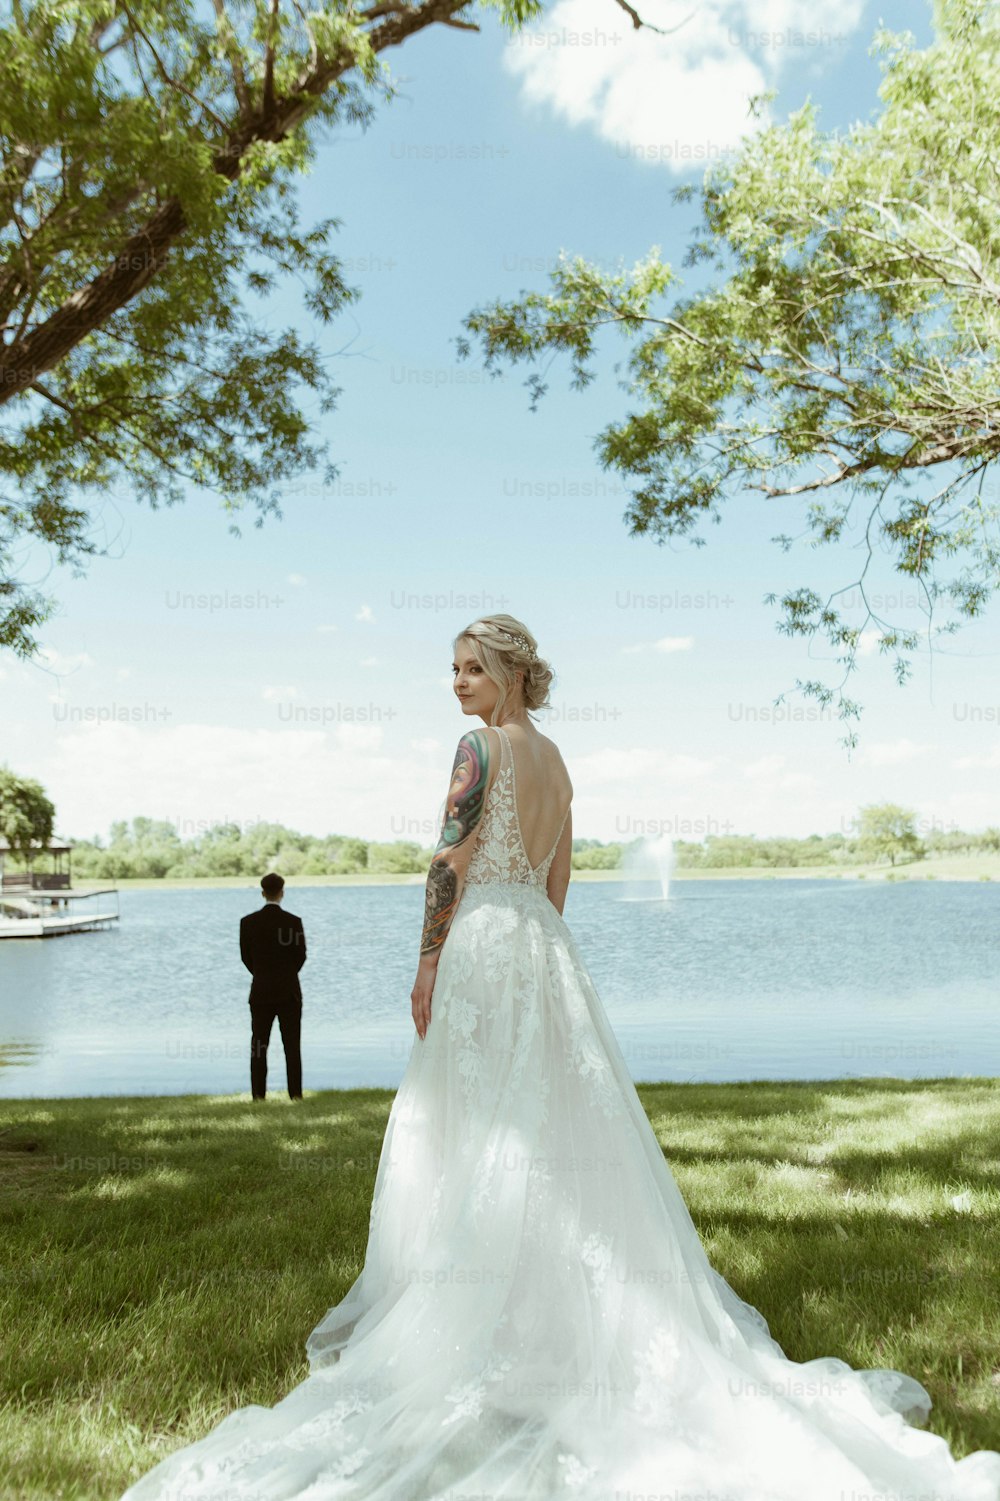 a woman in a wedding dress standing next to a lake